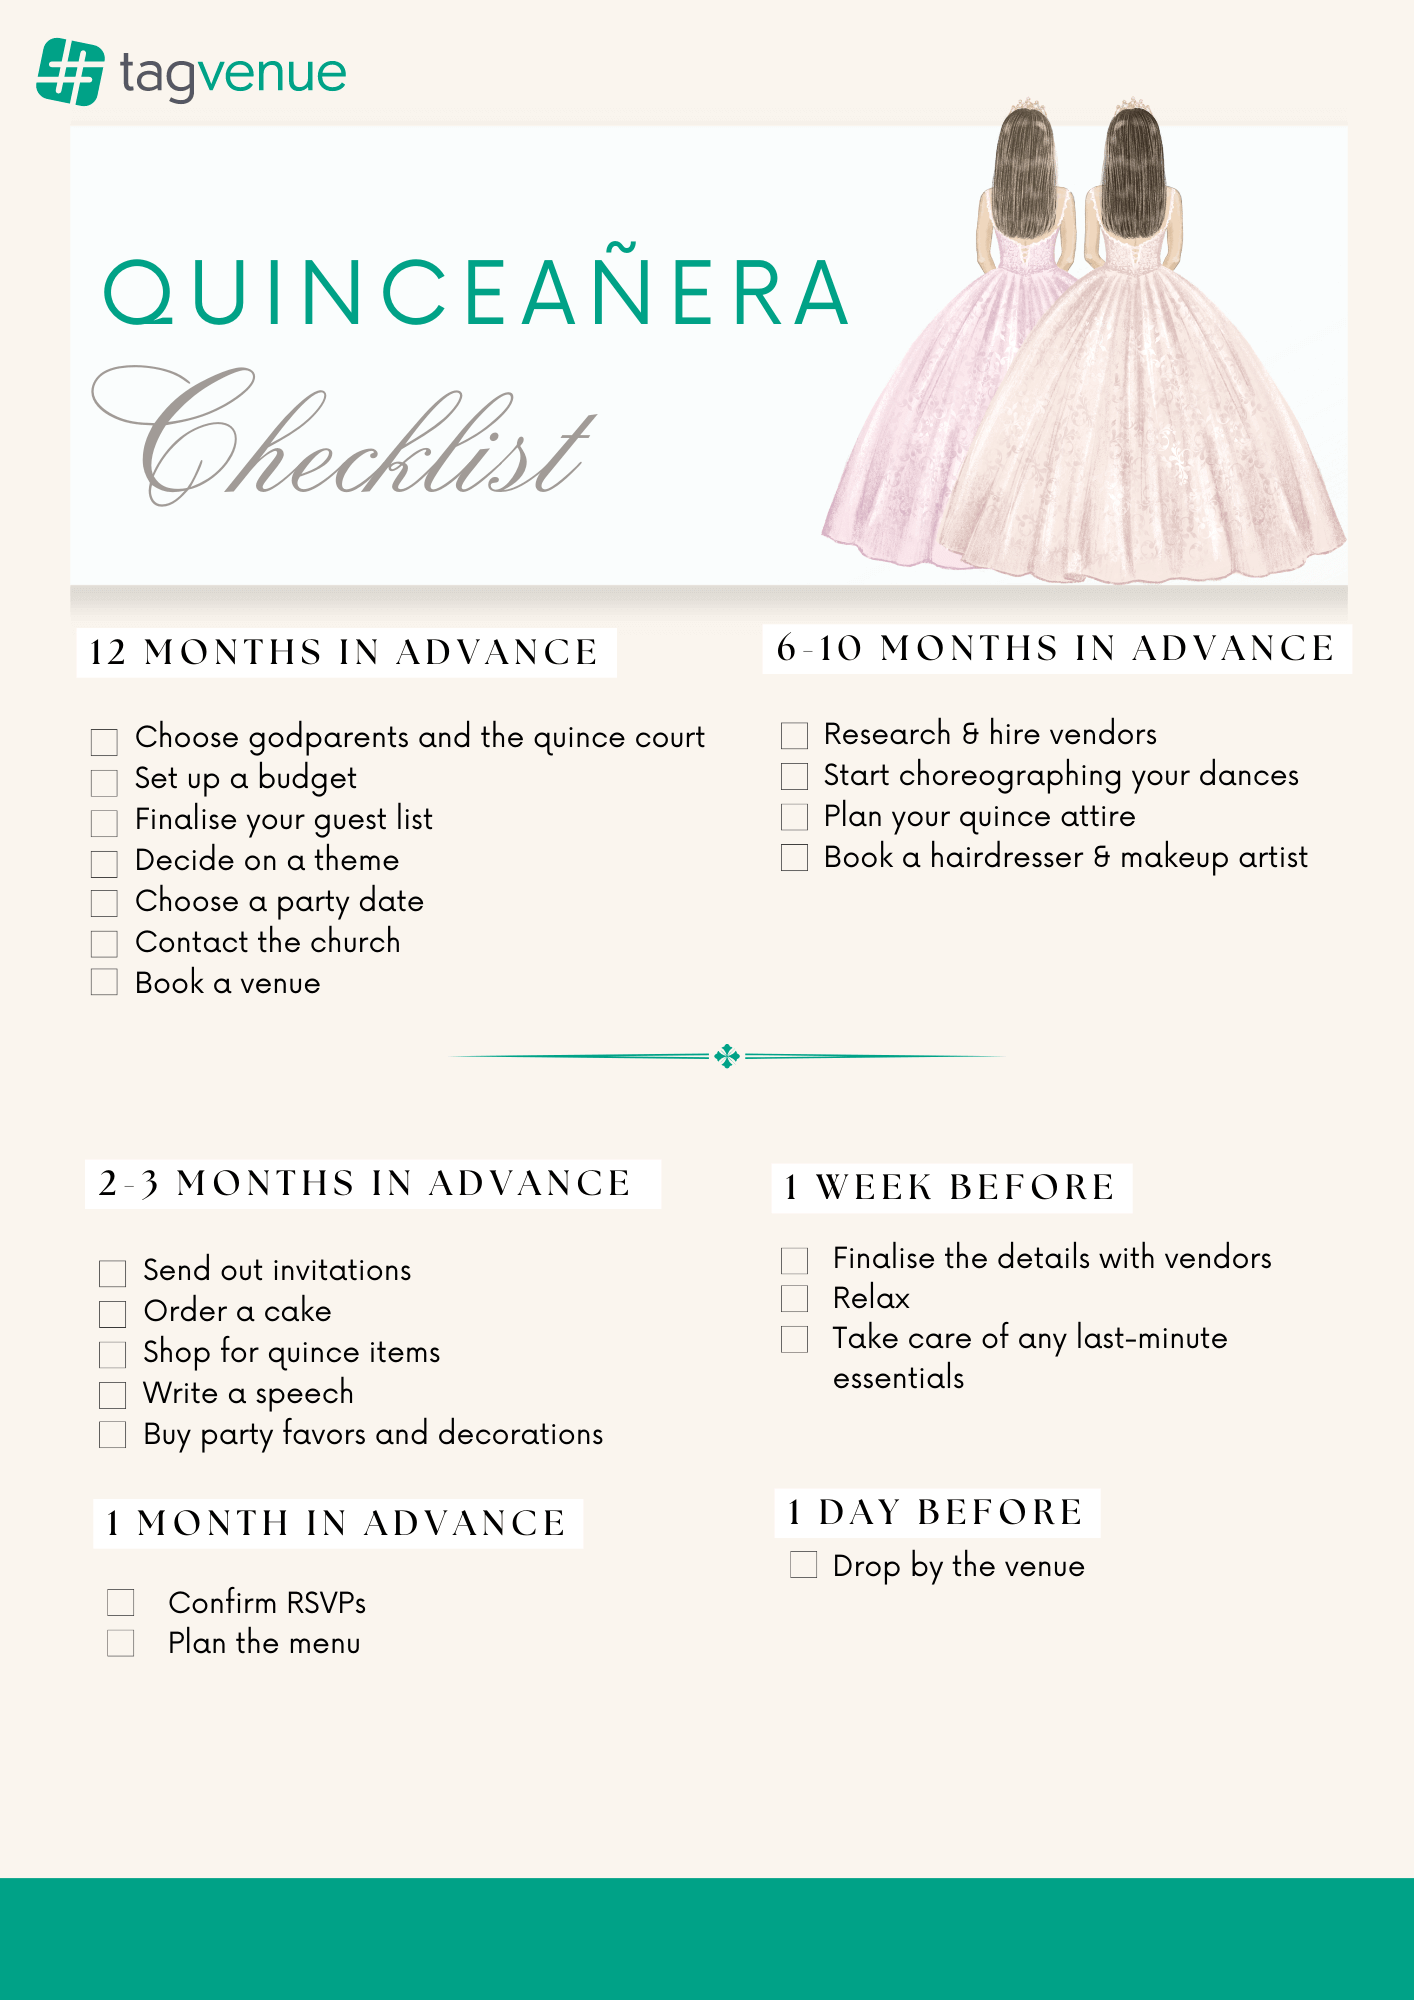 The Ultimate Guide To Quinceañera Planning Tagvenue Blog 3946